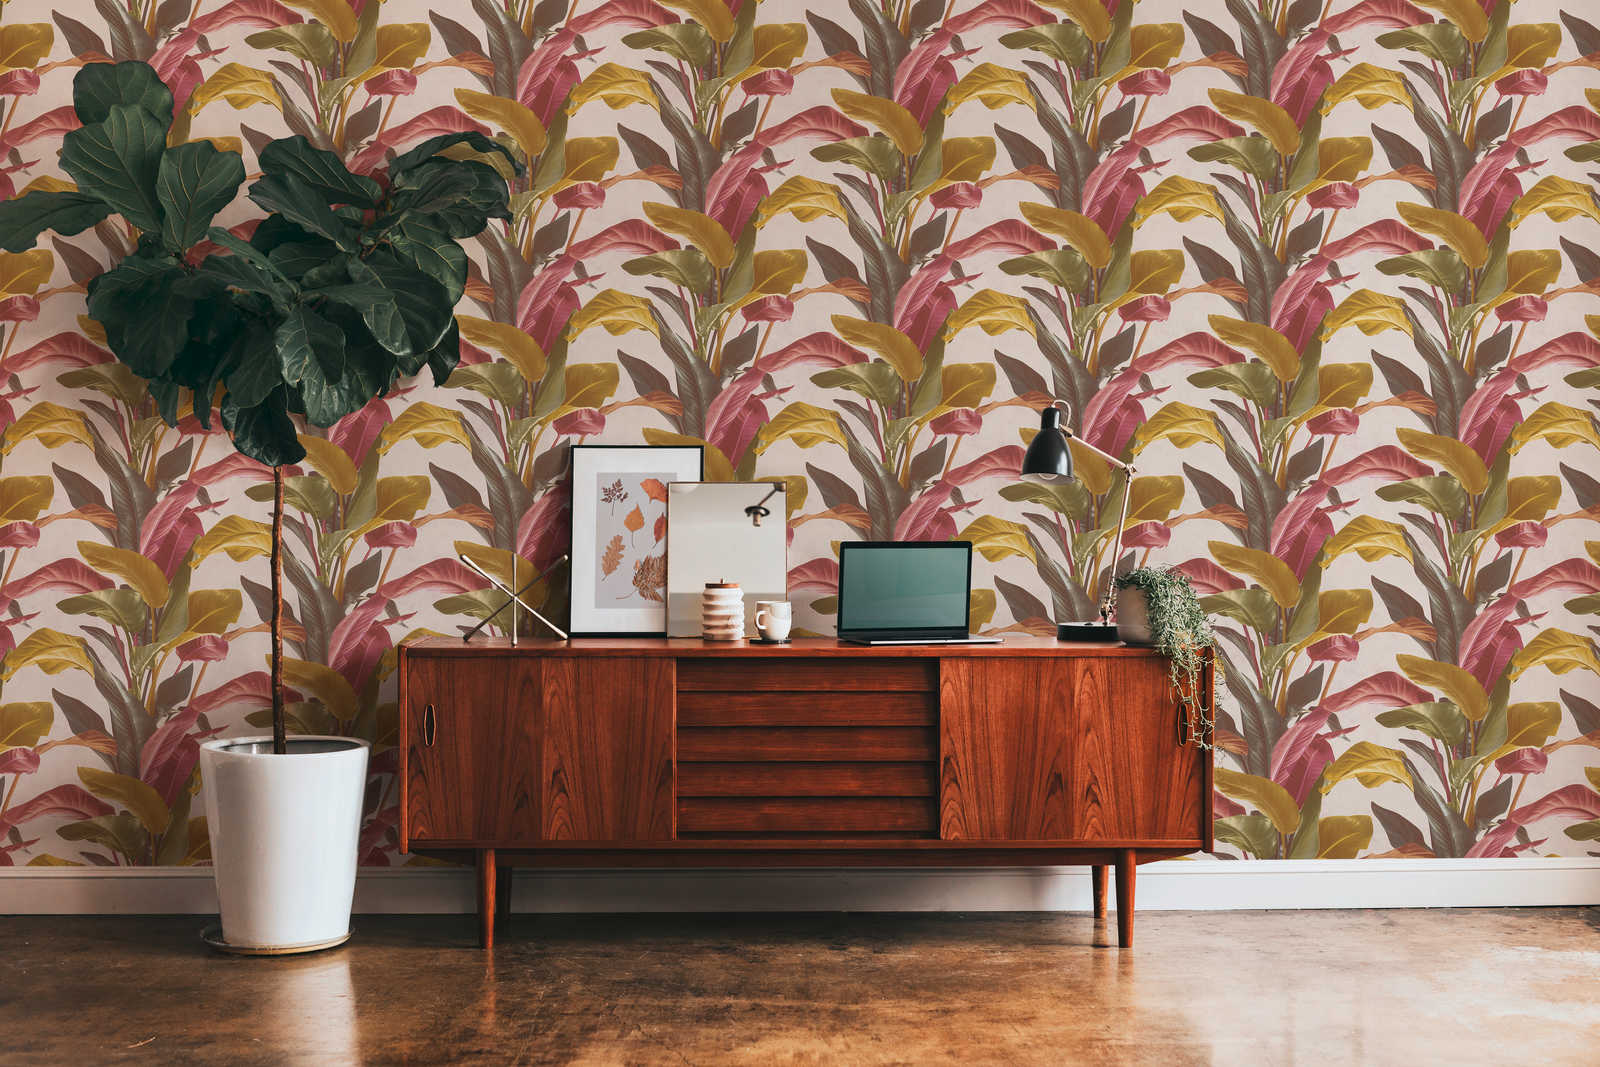             Colorful leaves wallpaper with satin sheen - brown, orange, red
        